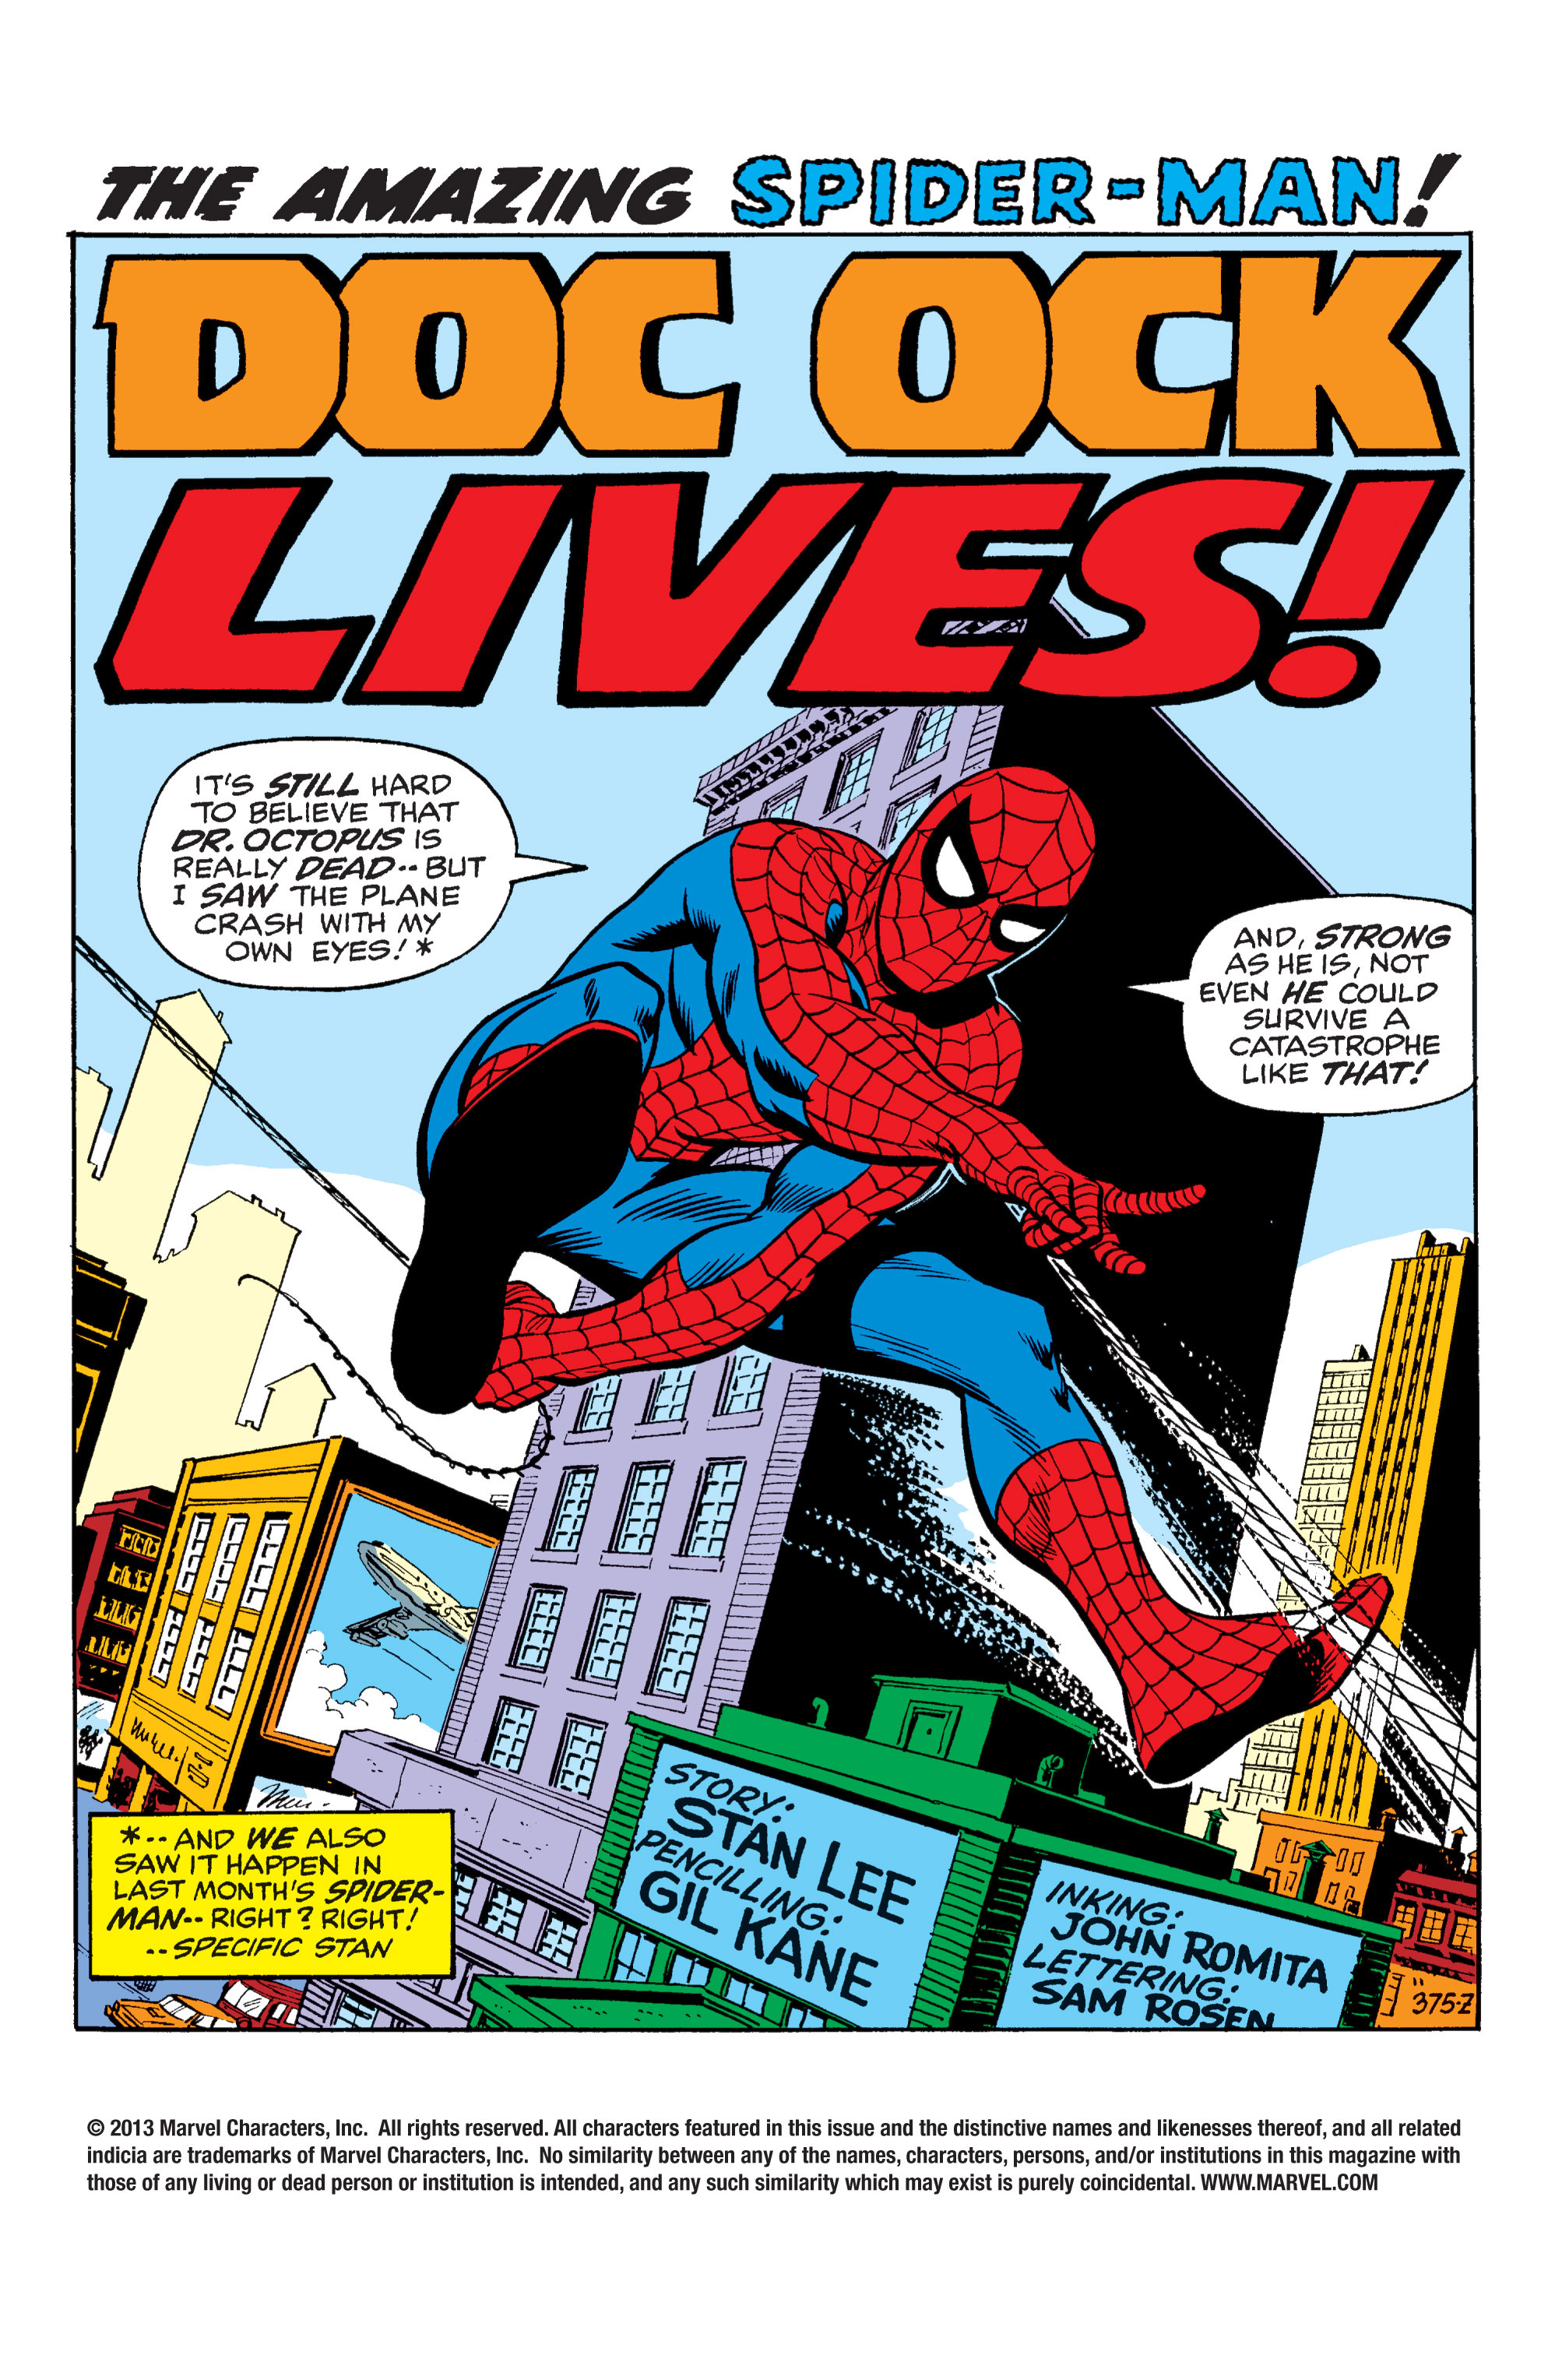 The Amazing Spider-Man (1963) 89 Page 1